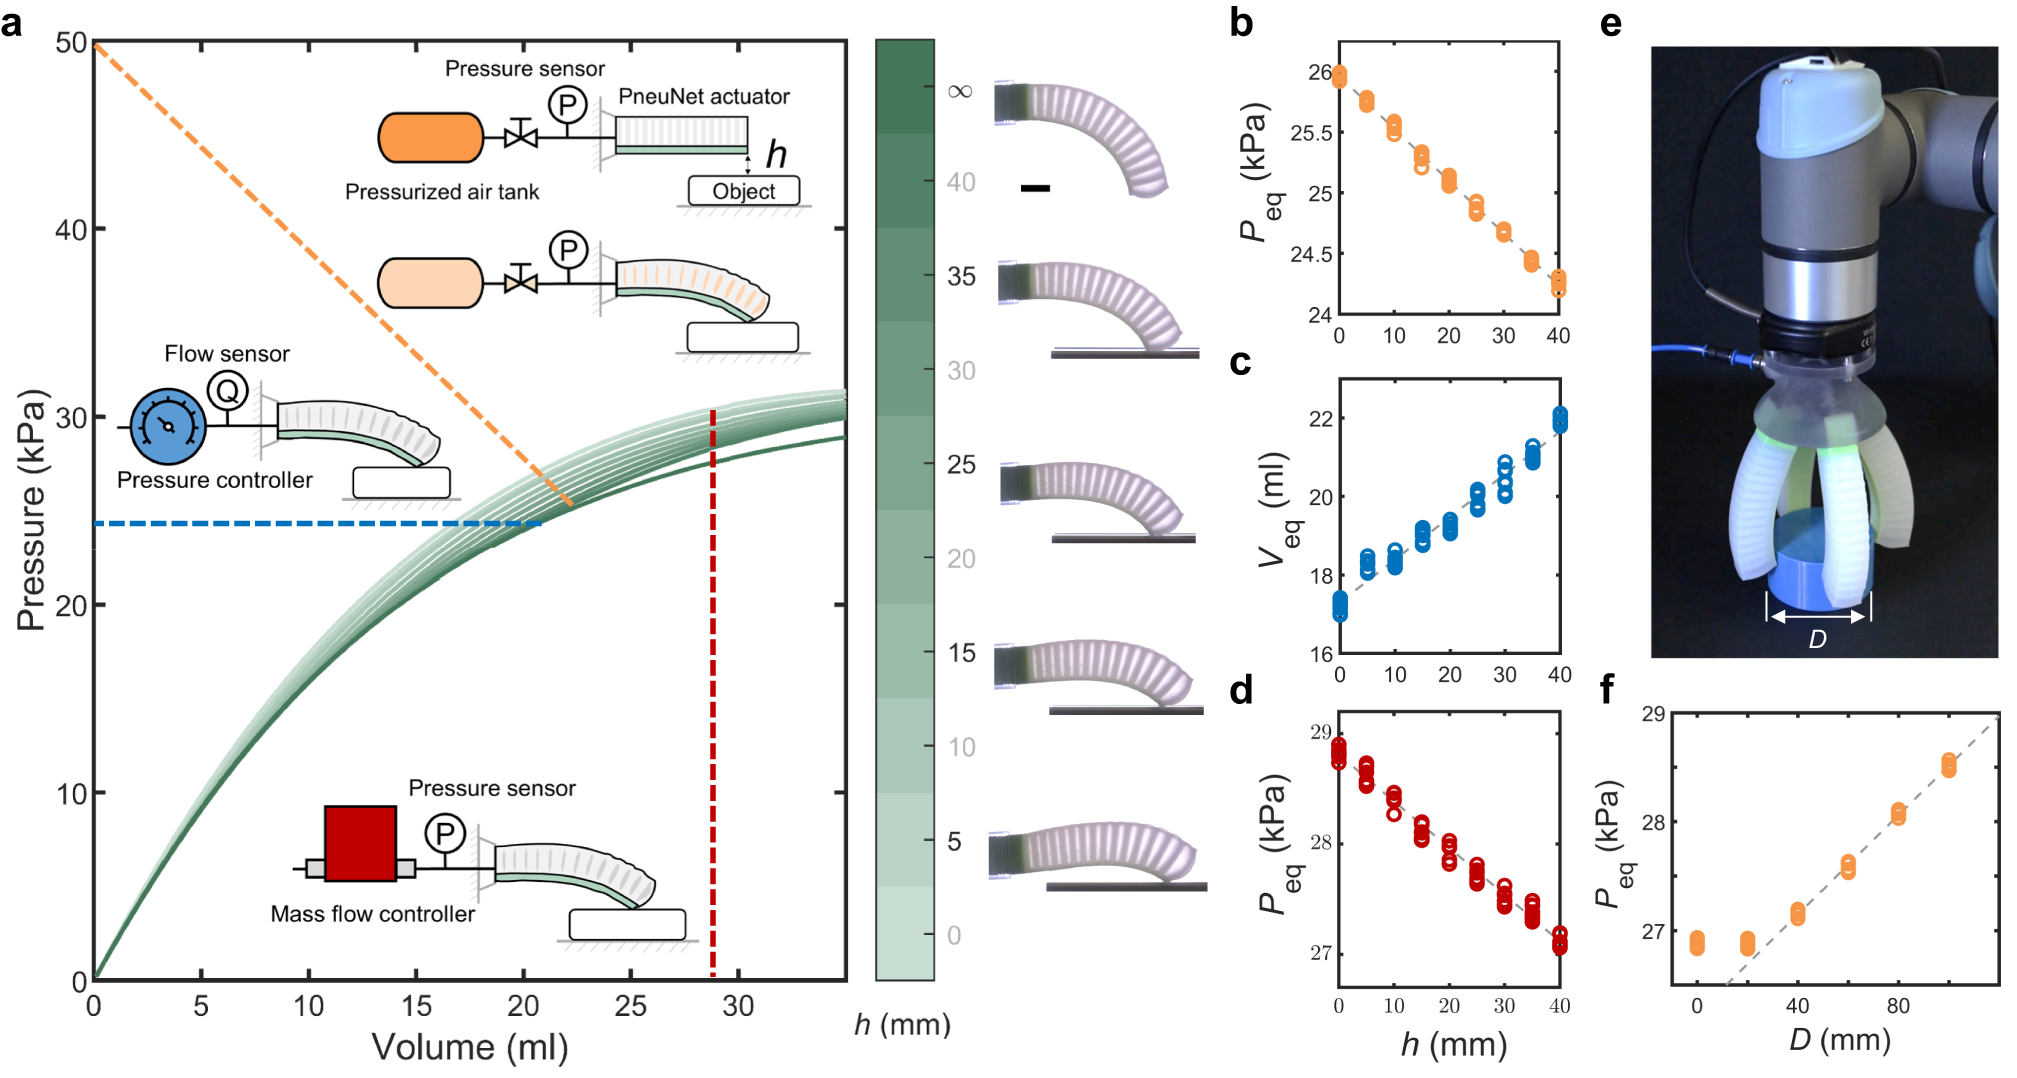 Active entanglement enables stochastic, topological grasping